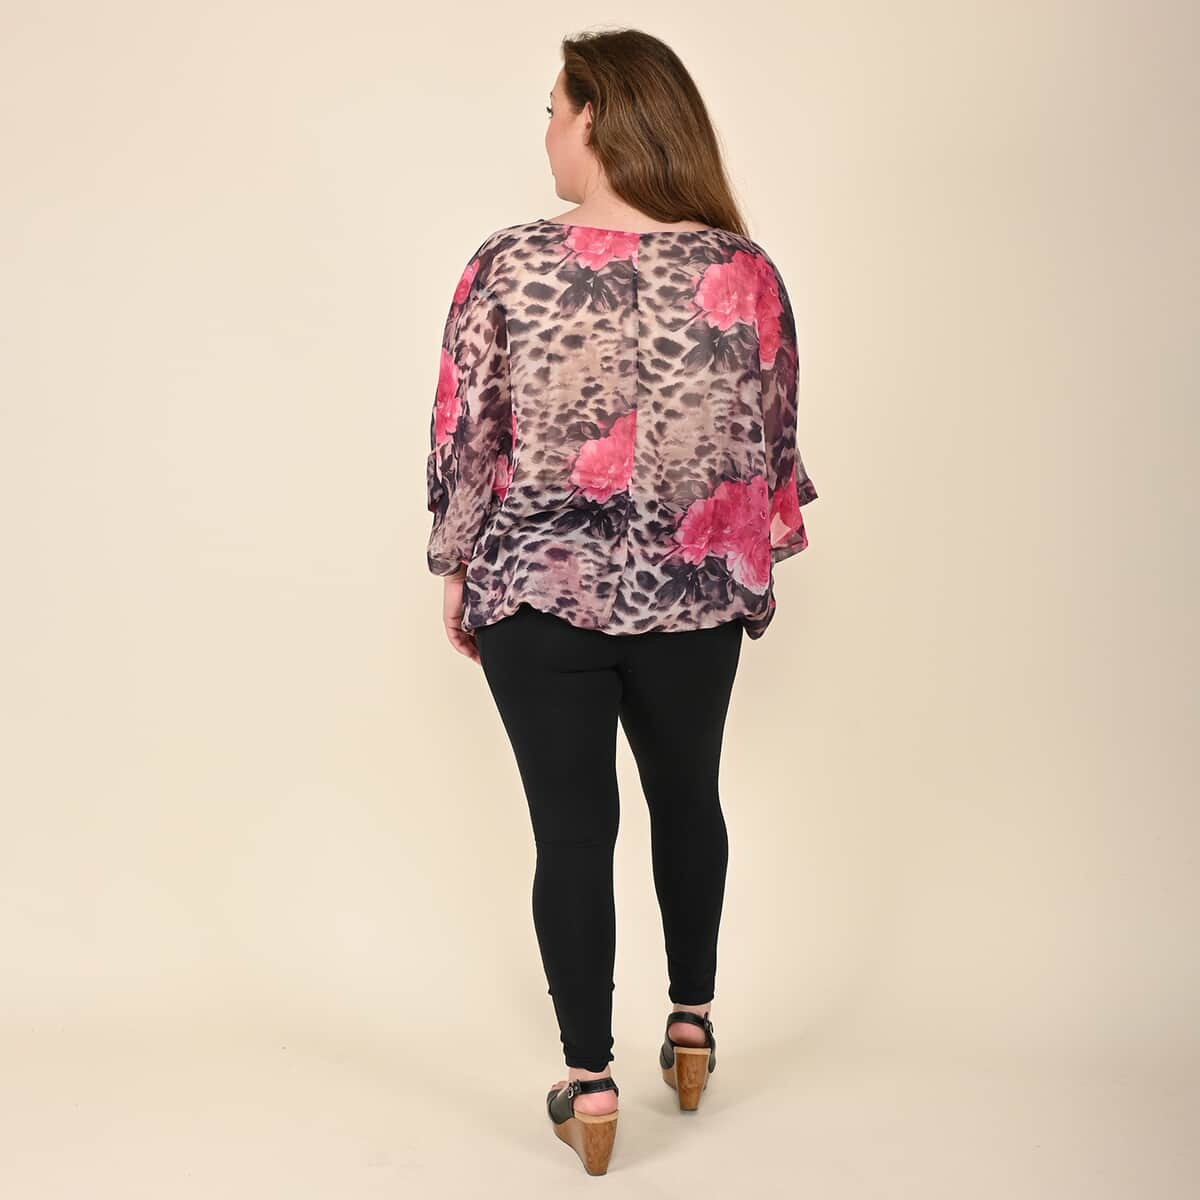 Tamsy Tan Leopard and Pink Floral Pattern Blouse - L image number 1